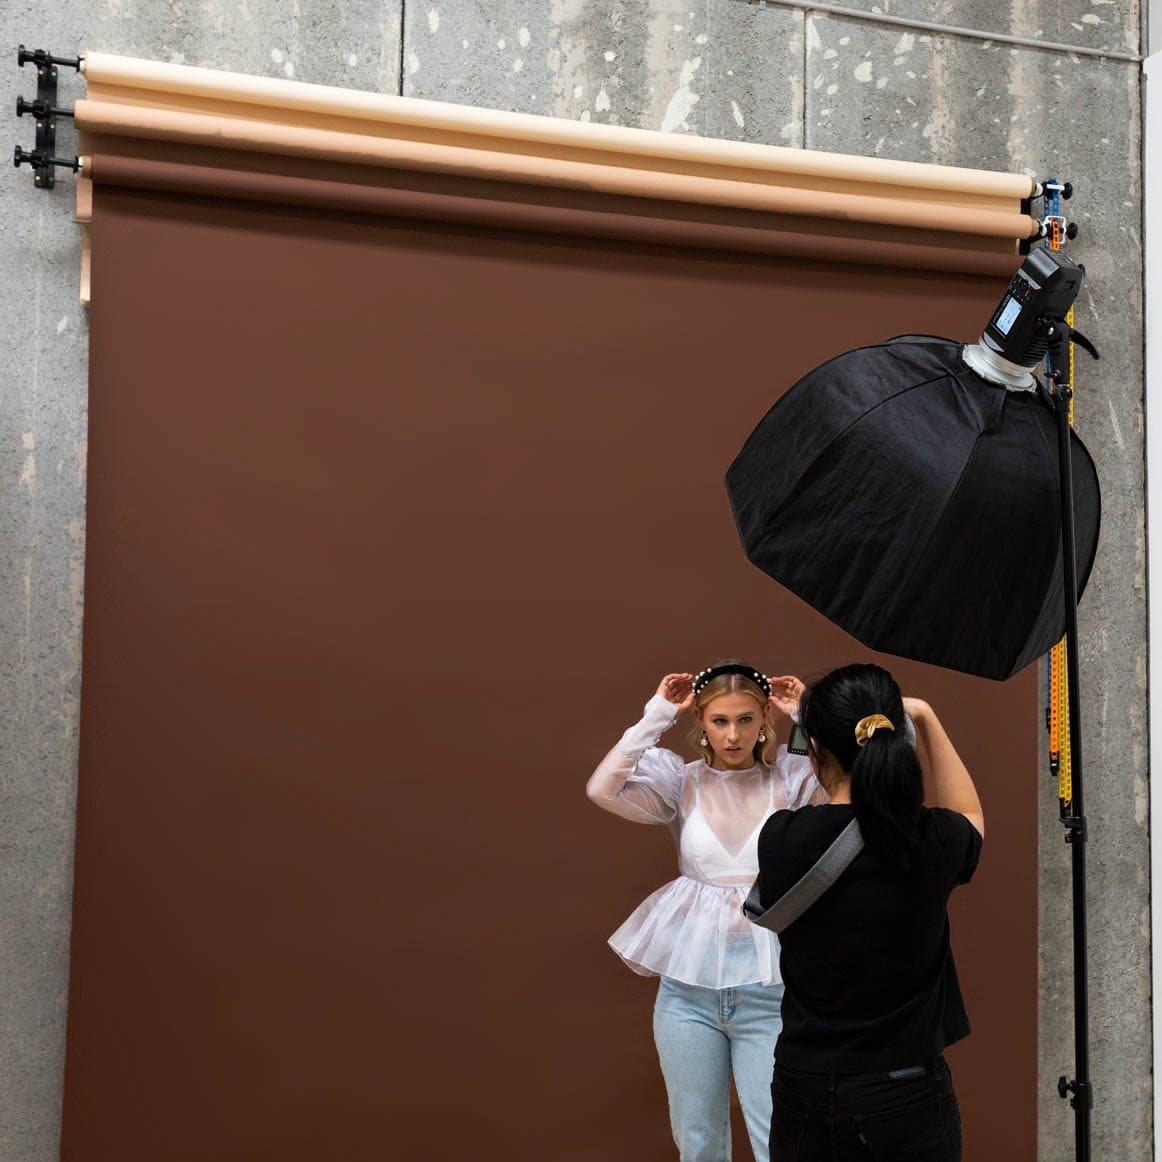 Paper Roll Photography Studio Backdrop Full Length (2.7 x 10M) - Espresso to Go Brown